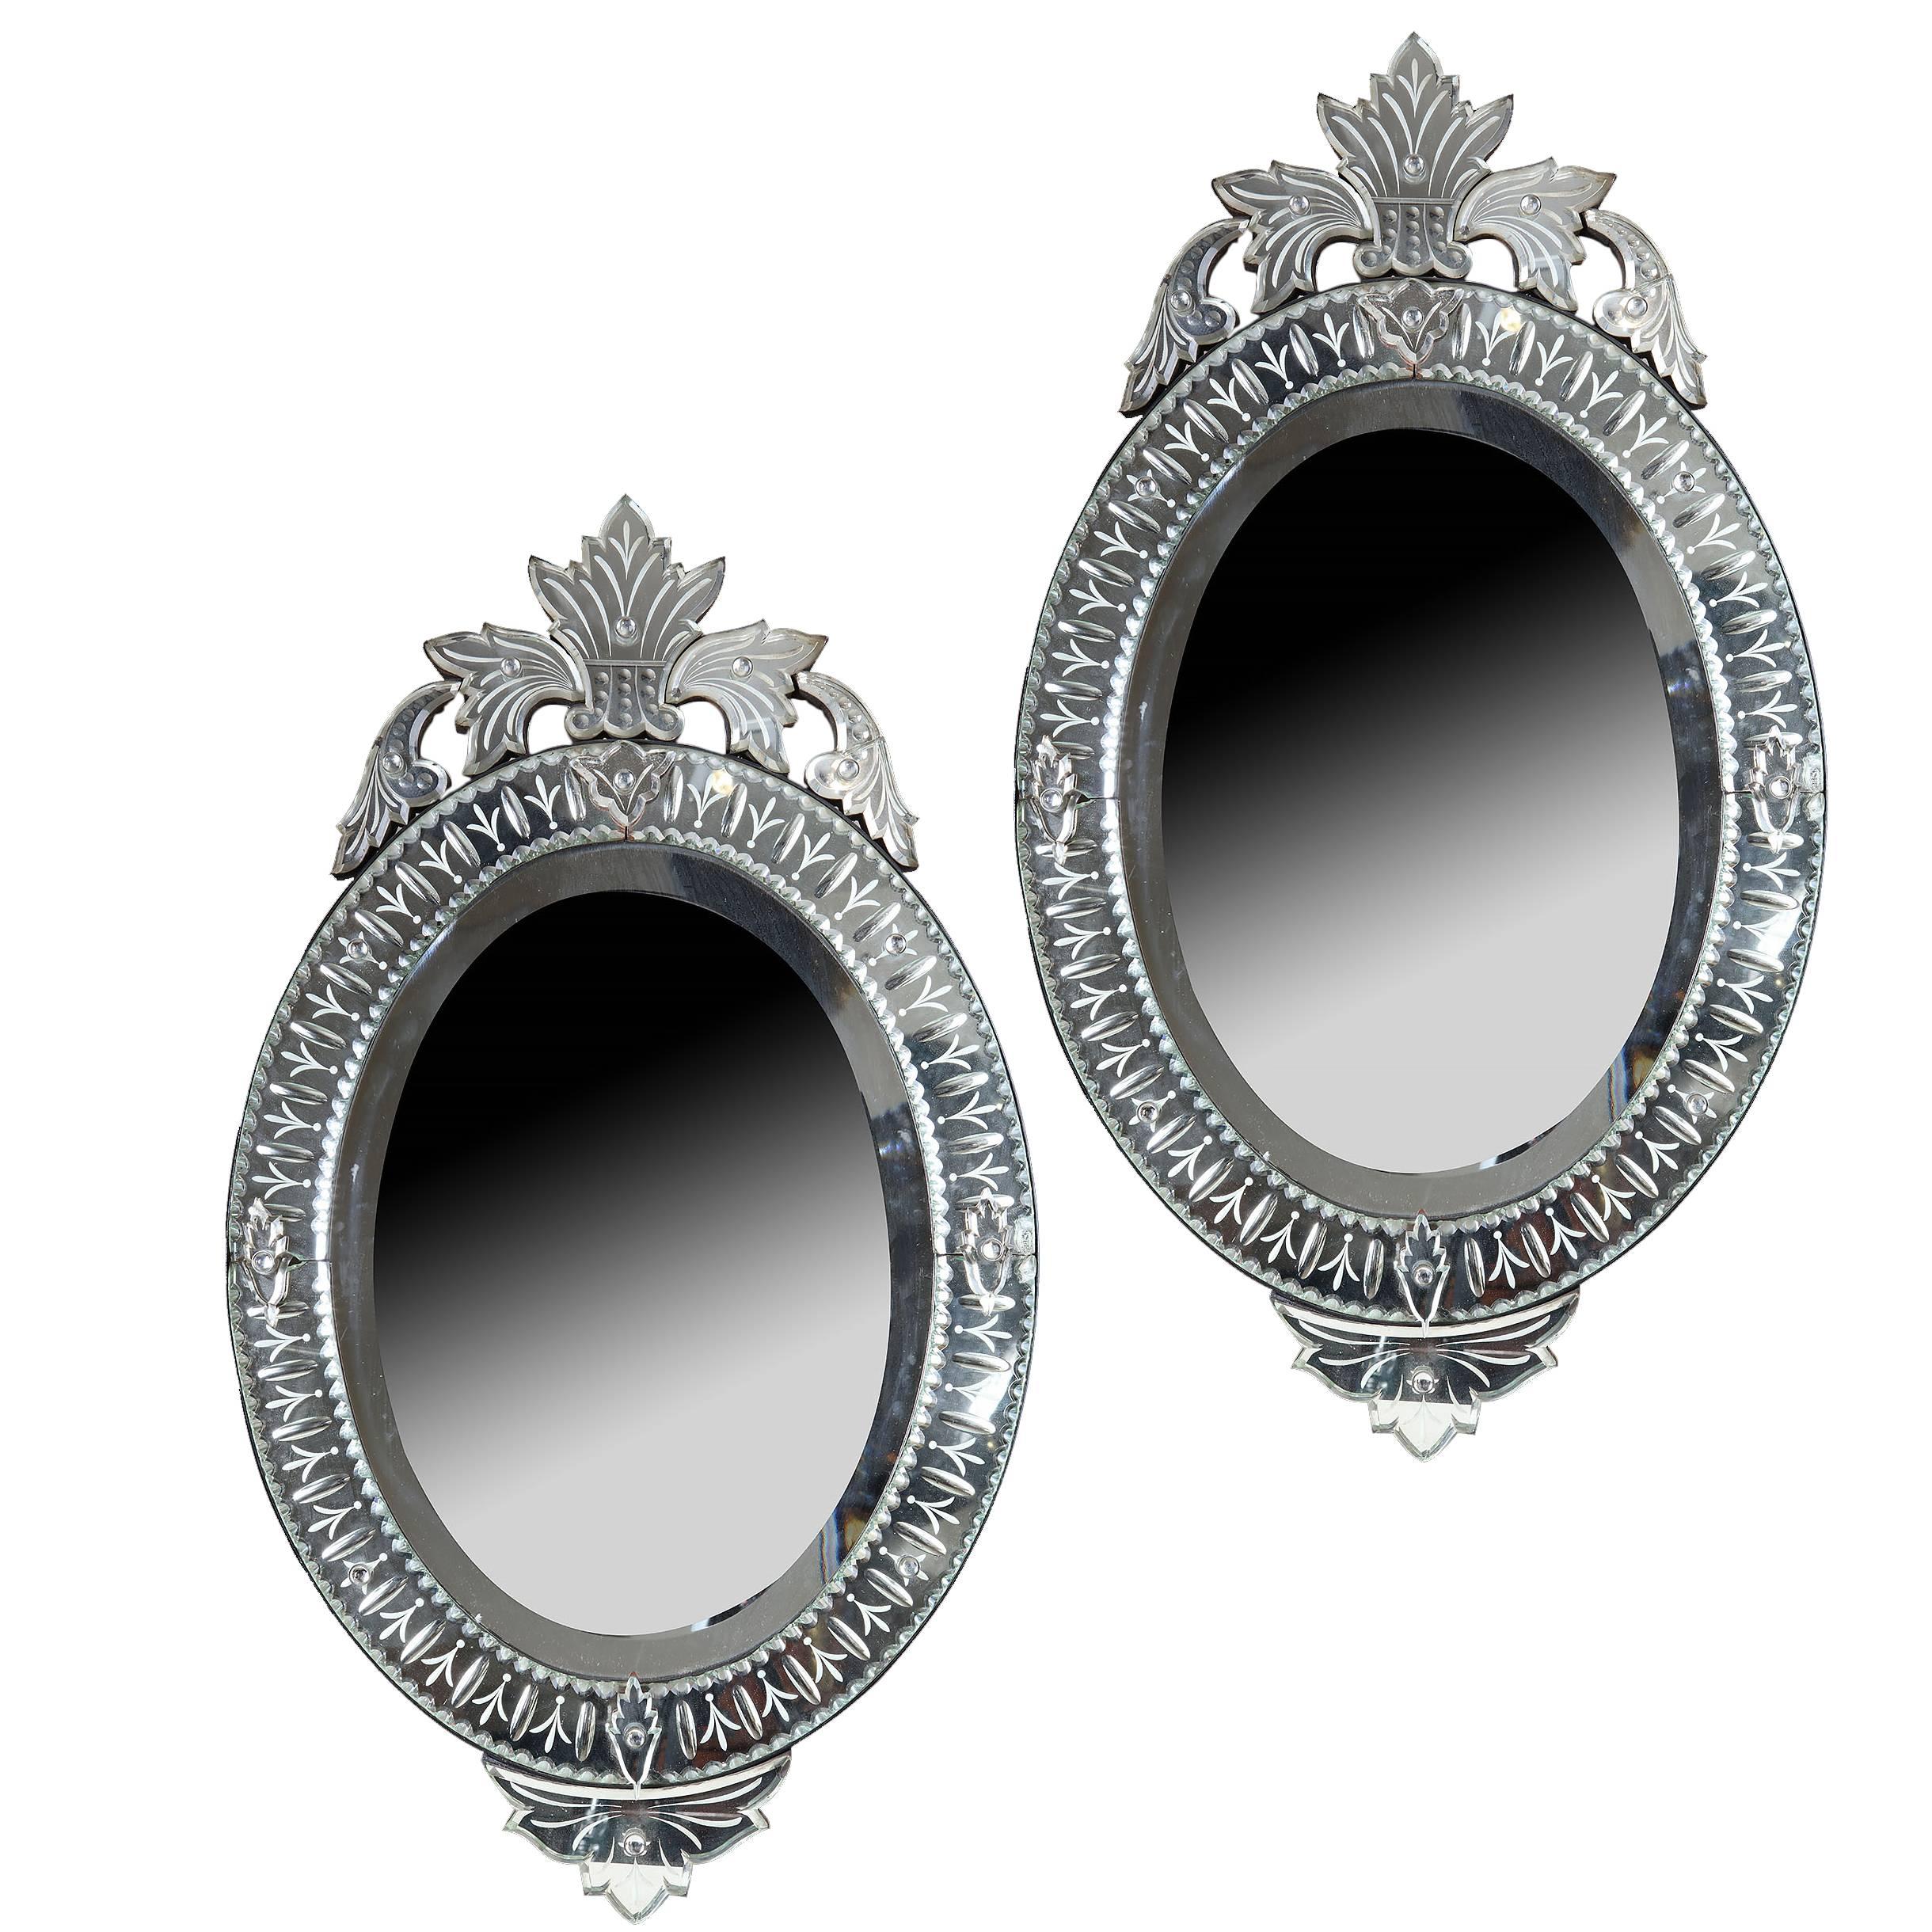 Pair of Engraved Oval Venetian Style Mirrors, 19th Century